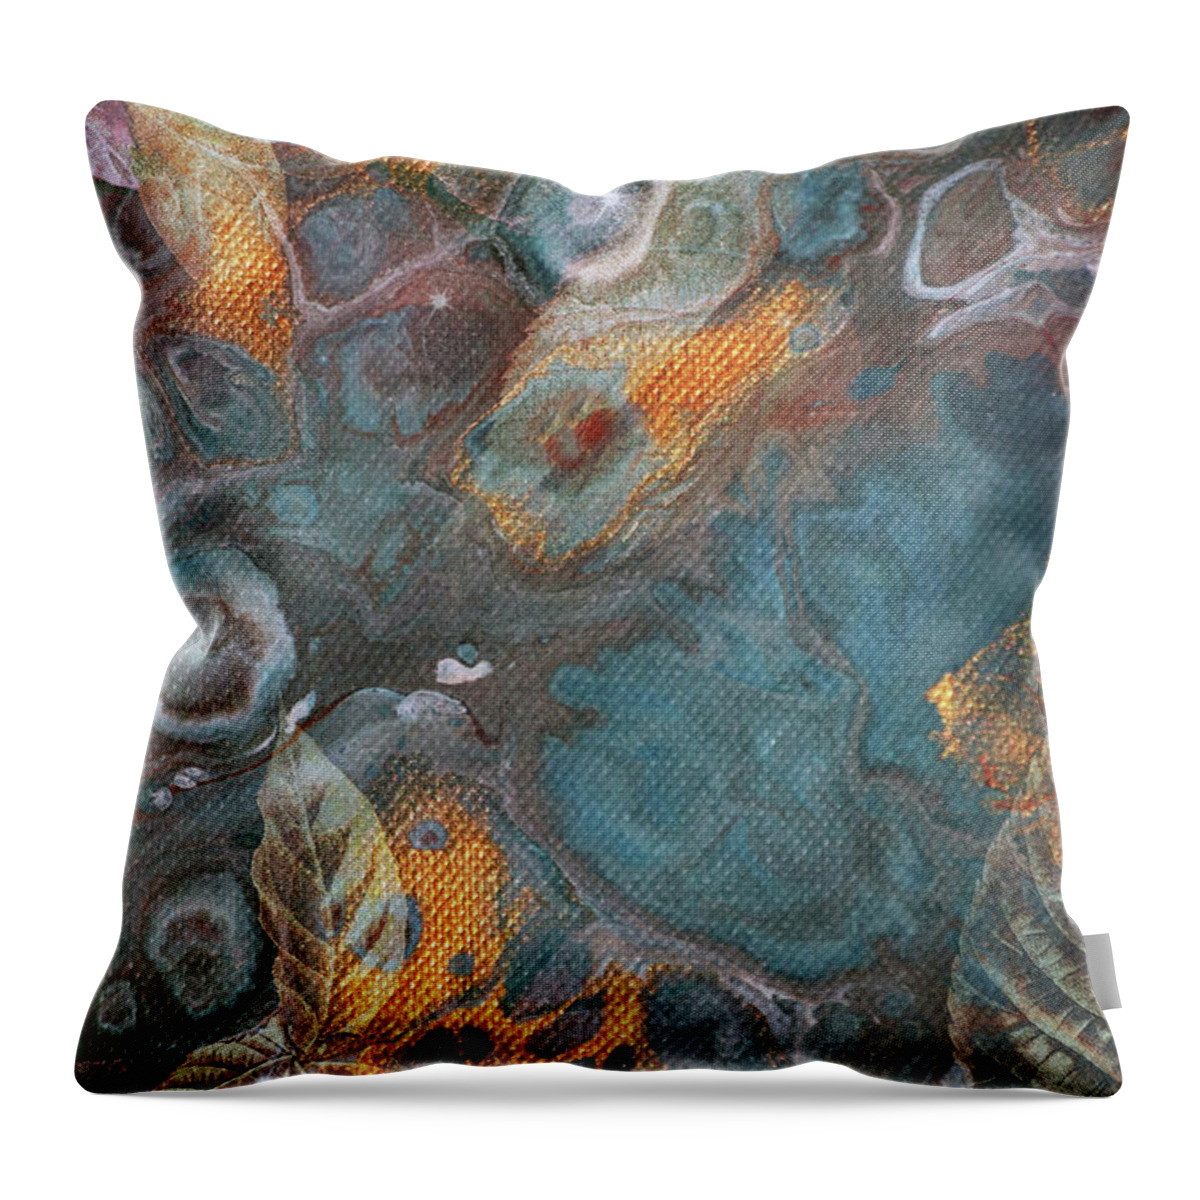 Fall Throw Pillow featuring the painting Autumn by Jacky Gerritsen